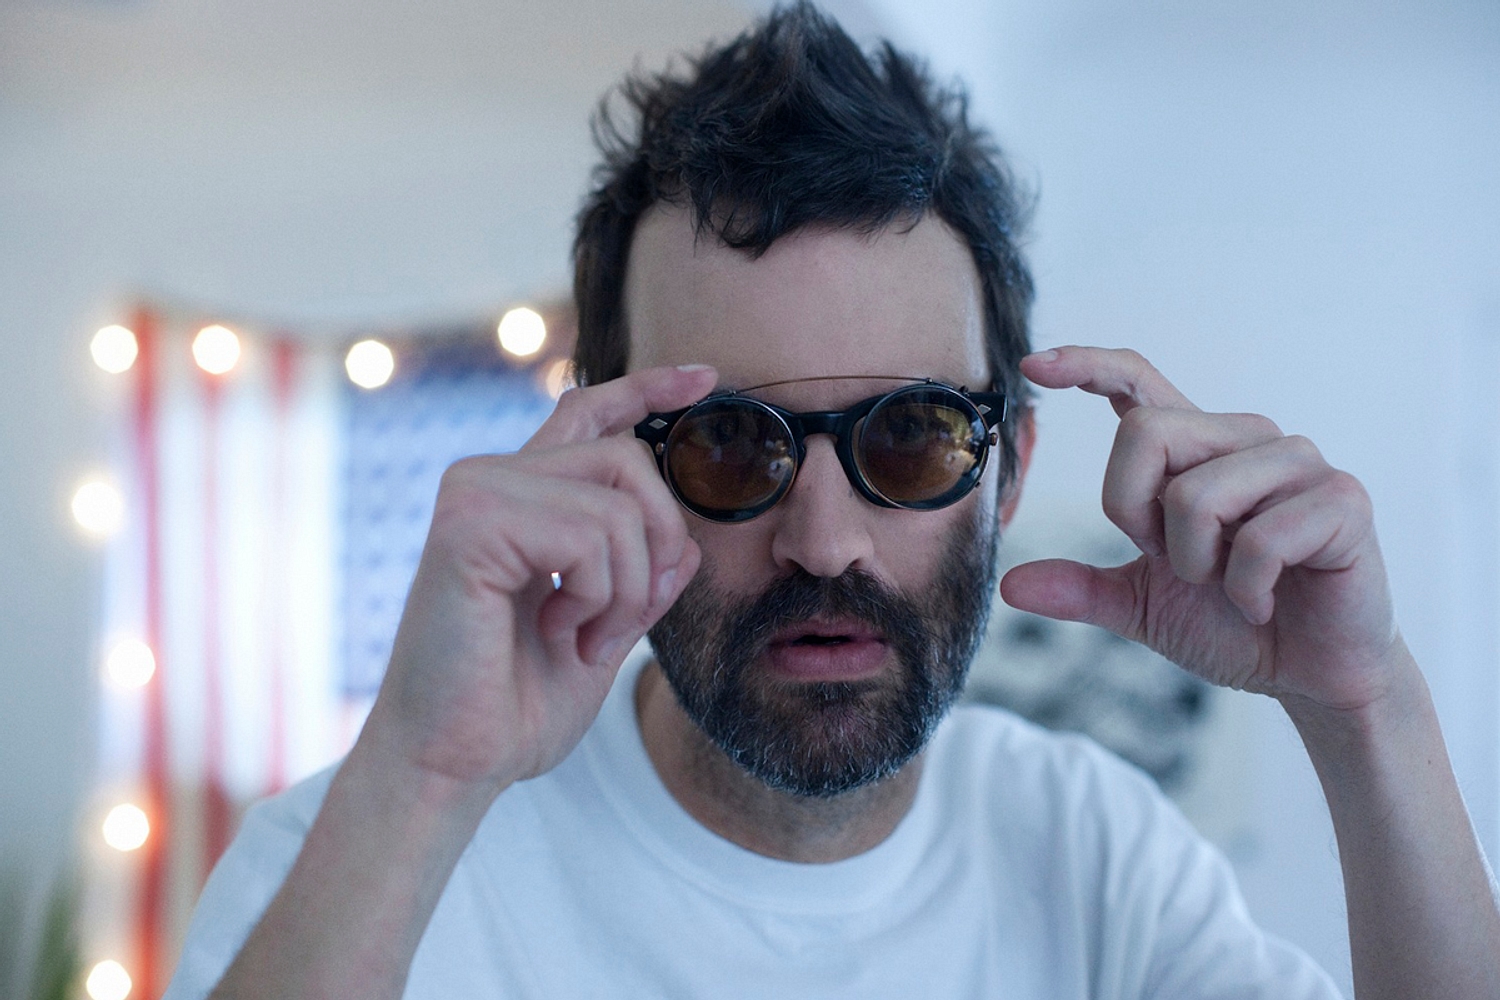 Eels add Manchester and Glasgow shows to 2019 plans